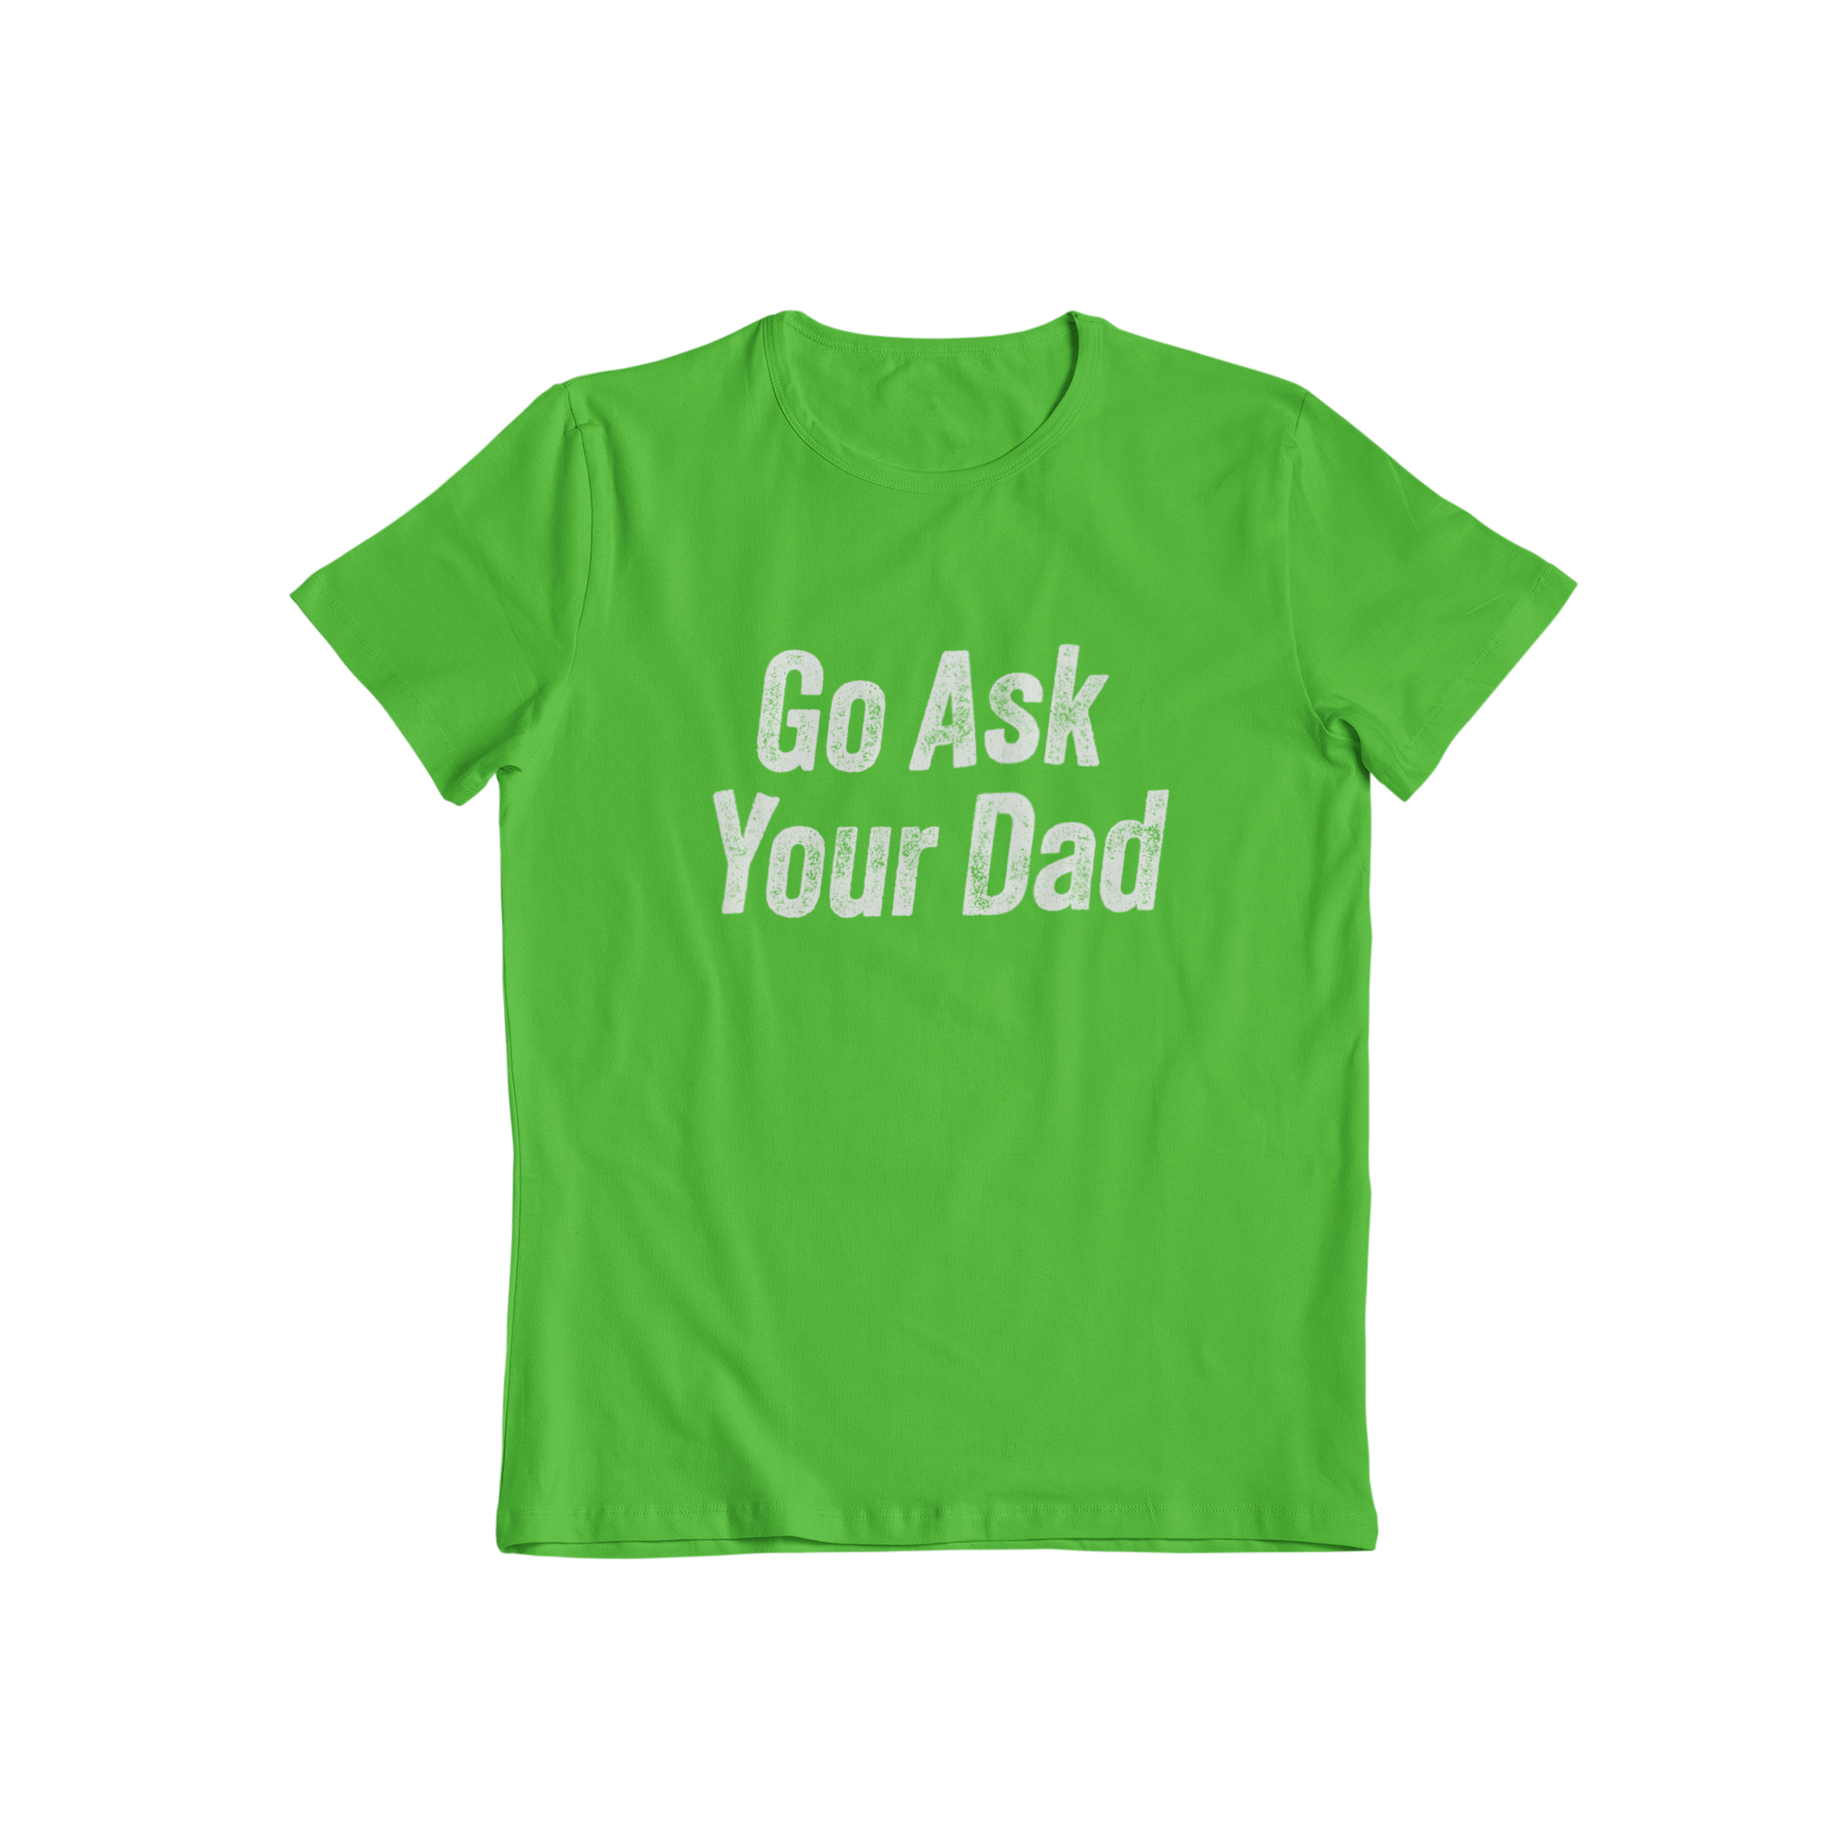 This matching slogan t-shirt is the perfect complement to our ask mum t-shirt - ask your dad about it!